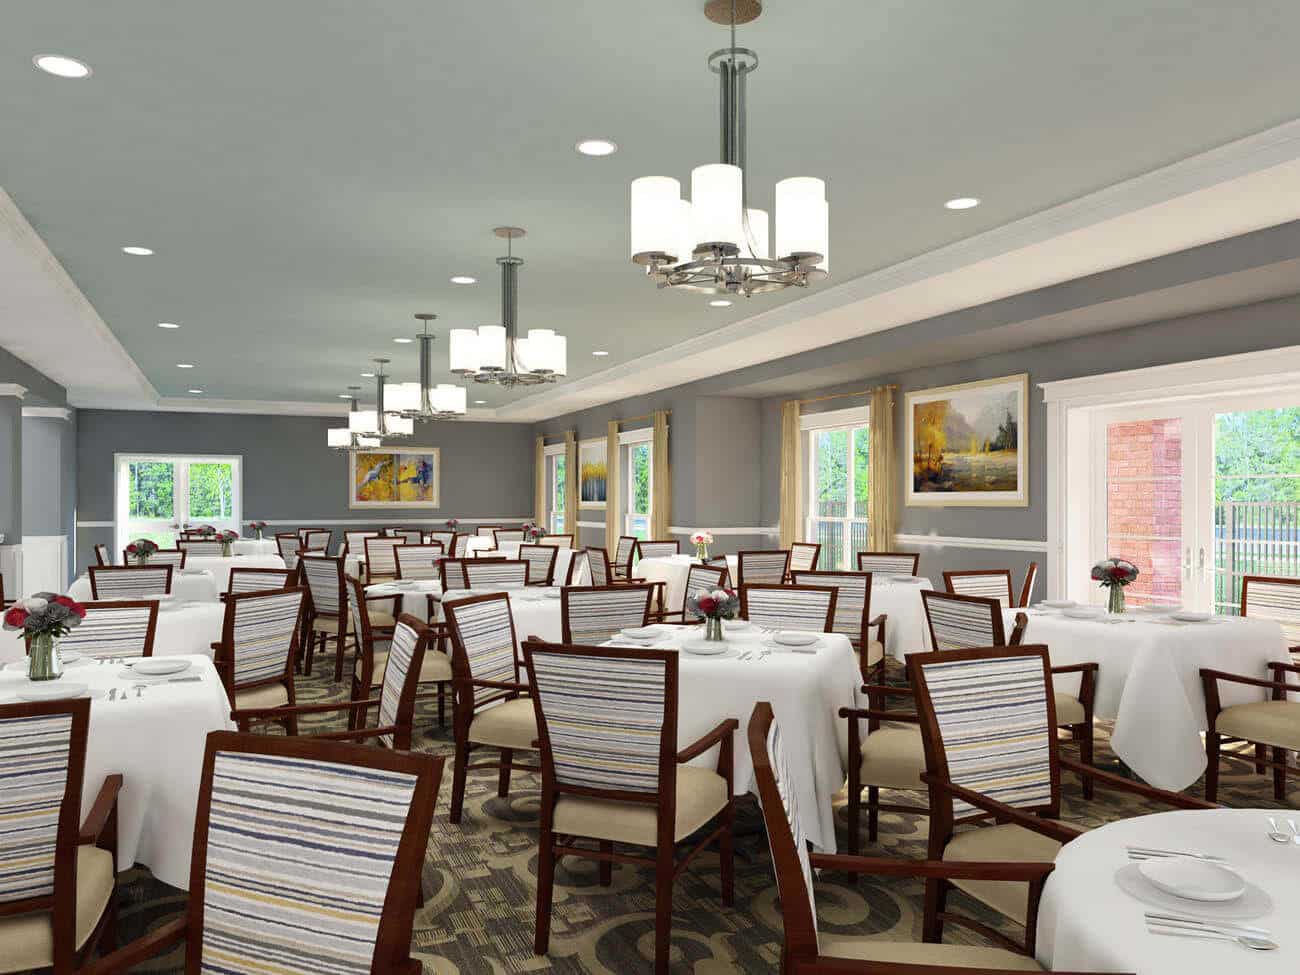 crossings dining room with striped chairs